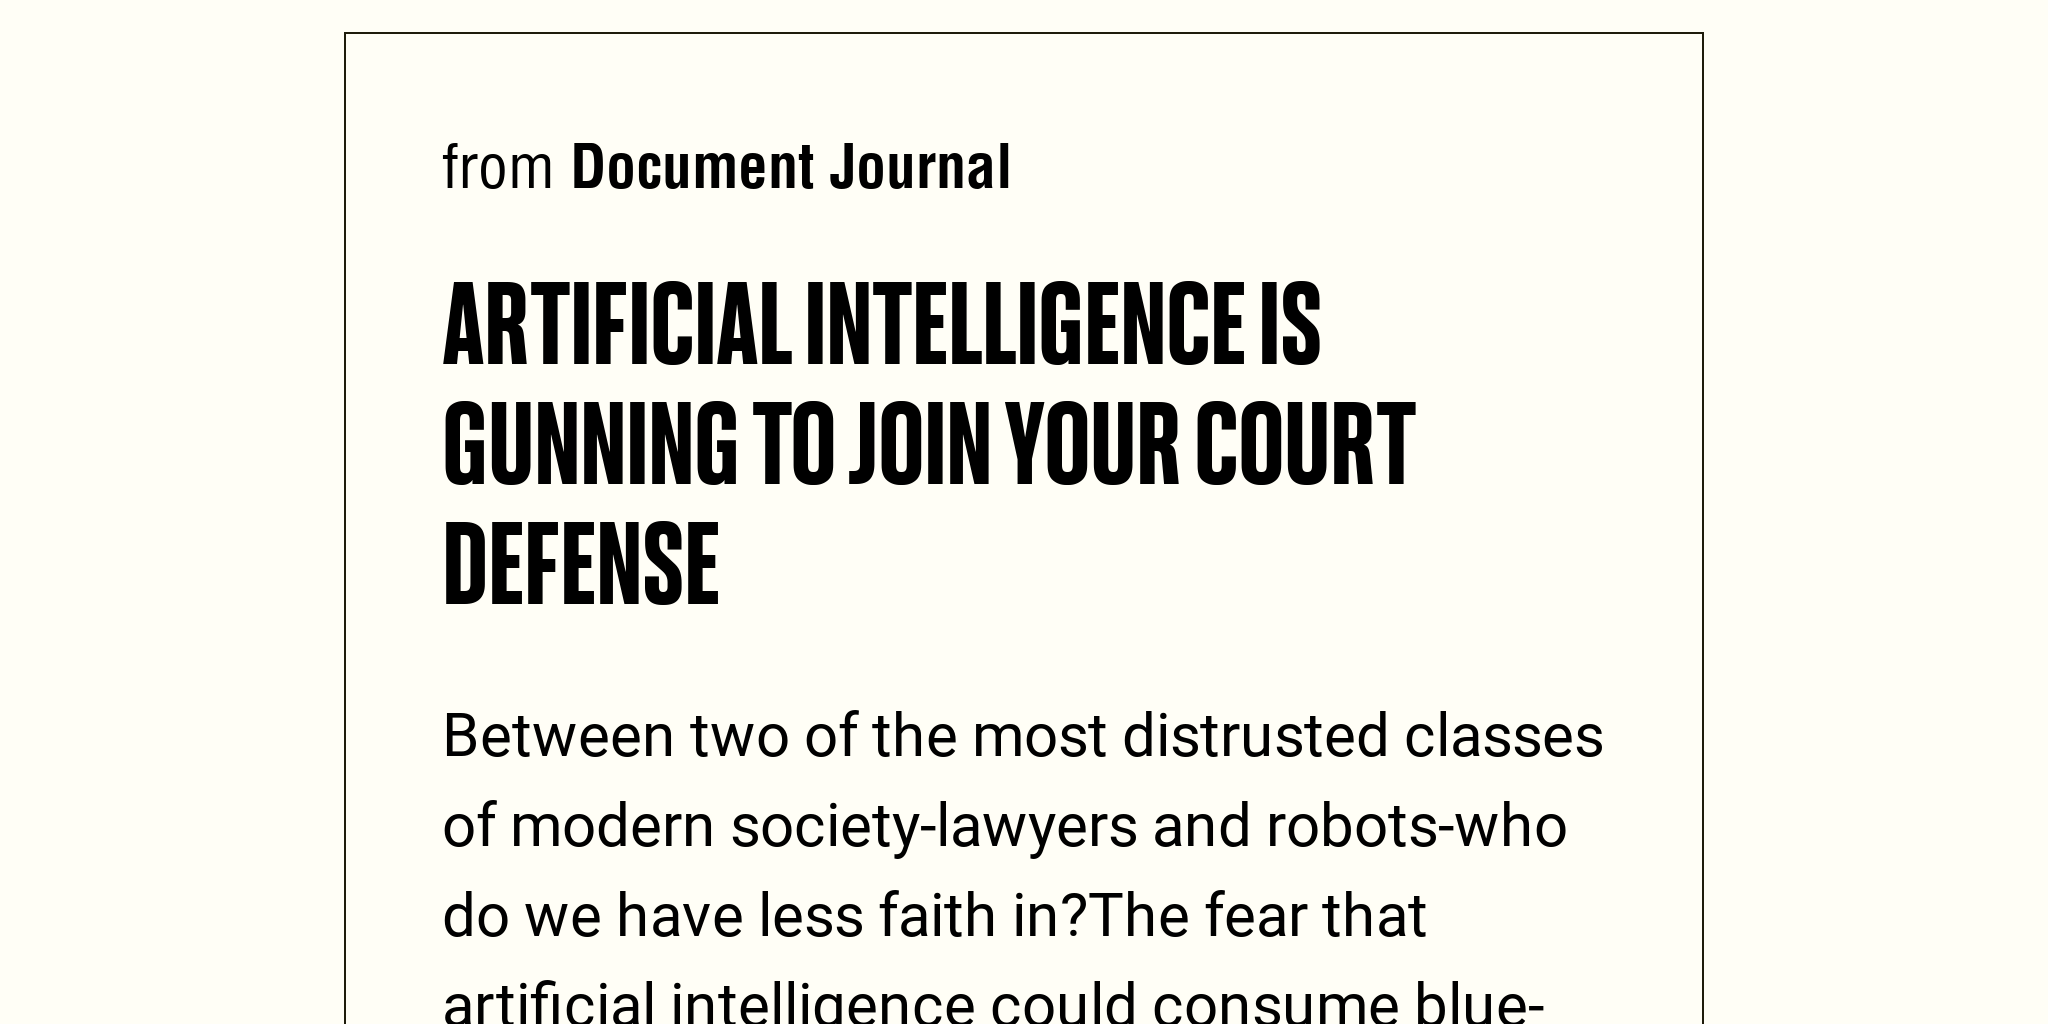 Artificial intelligence is gunning to join your court defense Briefly